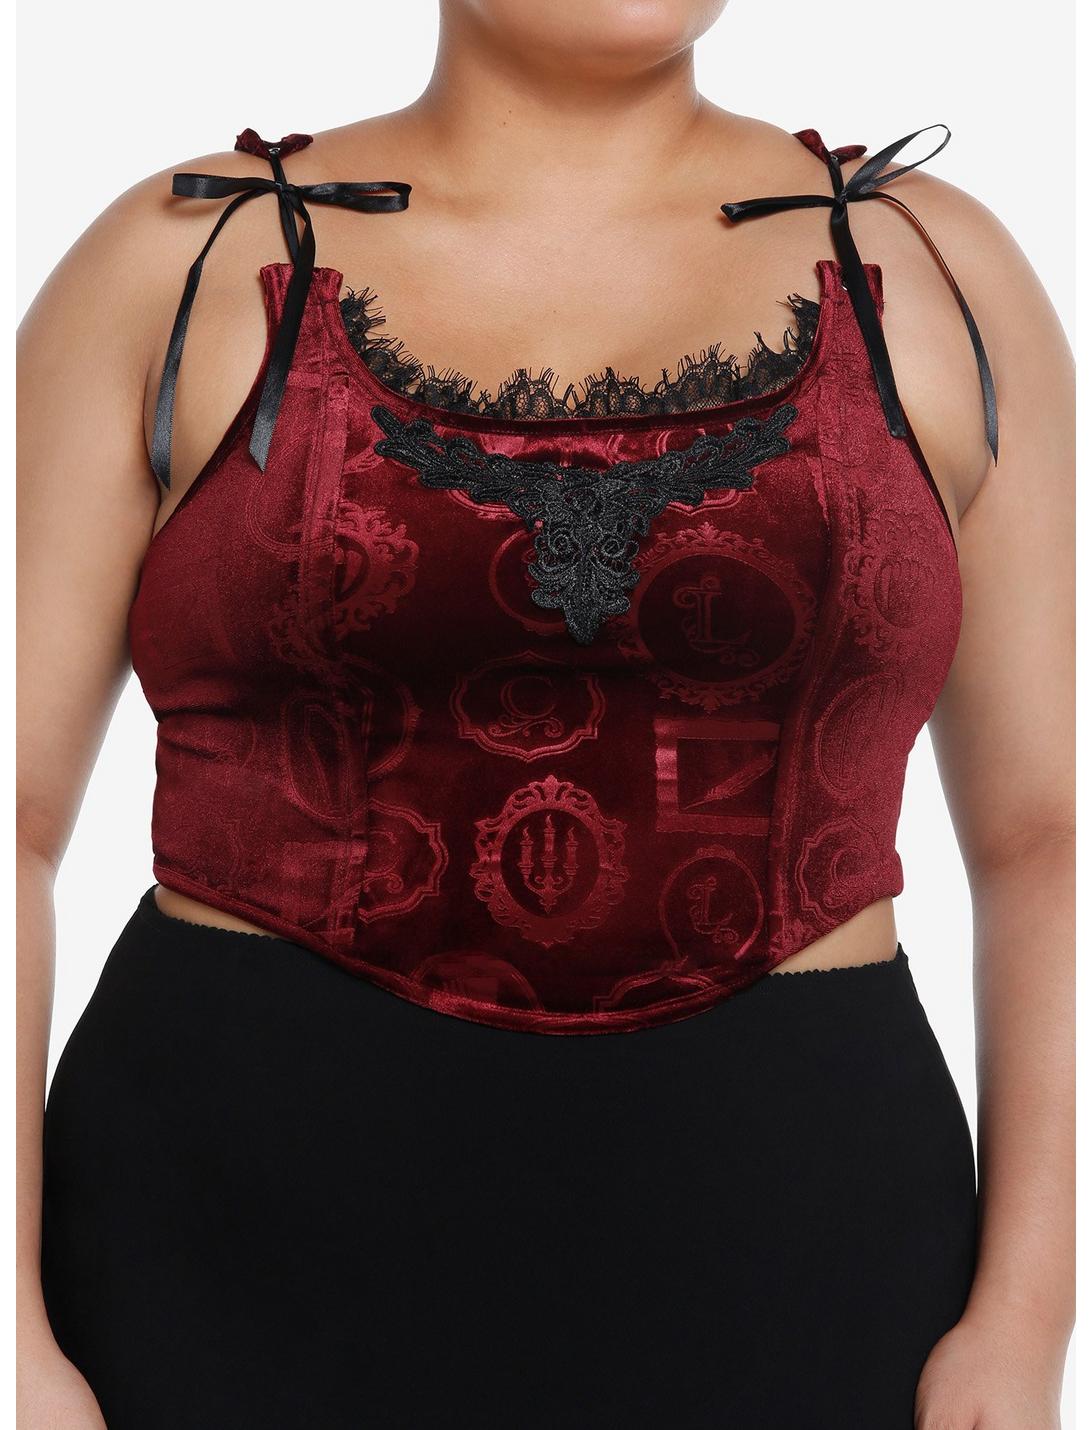 Interview With The Vampire Velvet Lace Girls Corset Plus Size, BLACK, hi-res